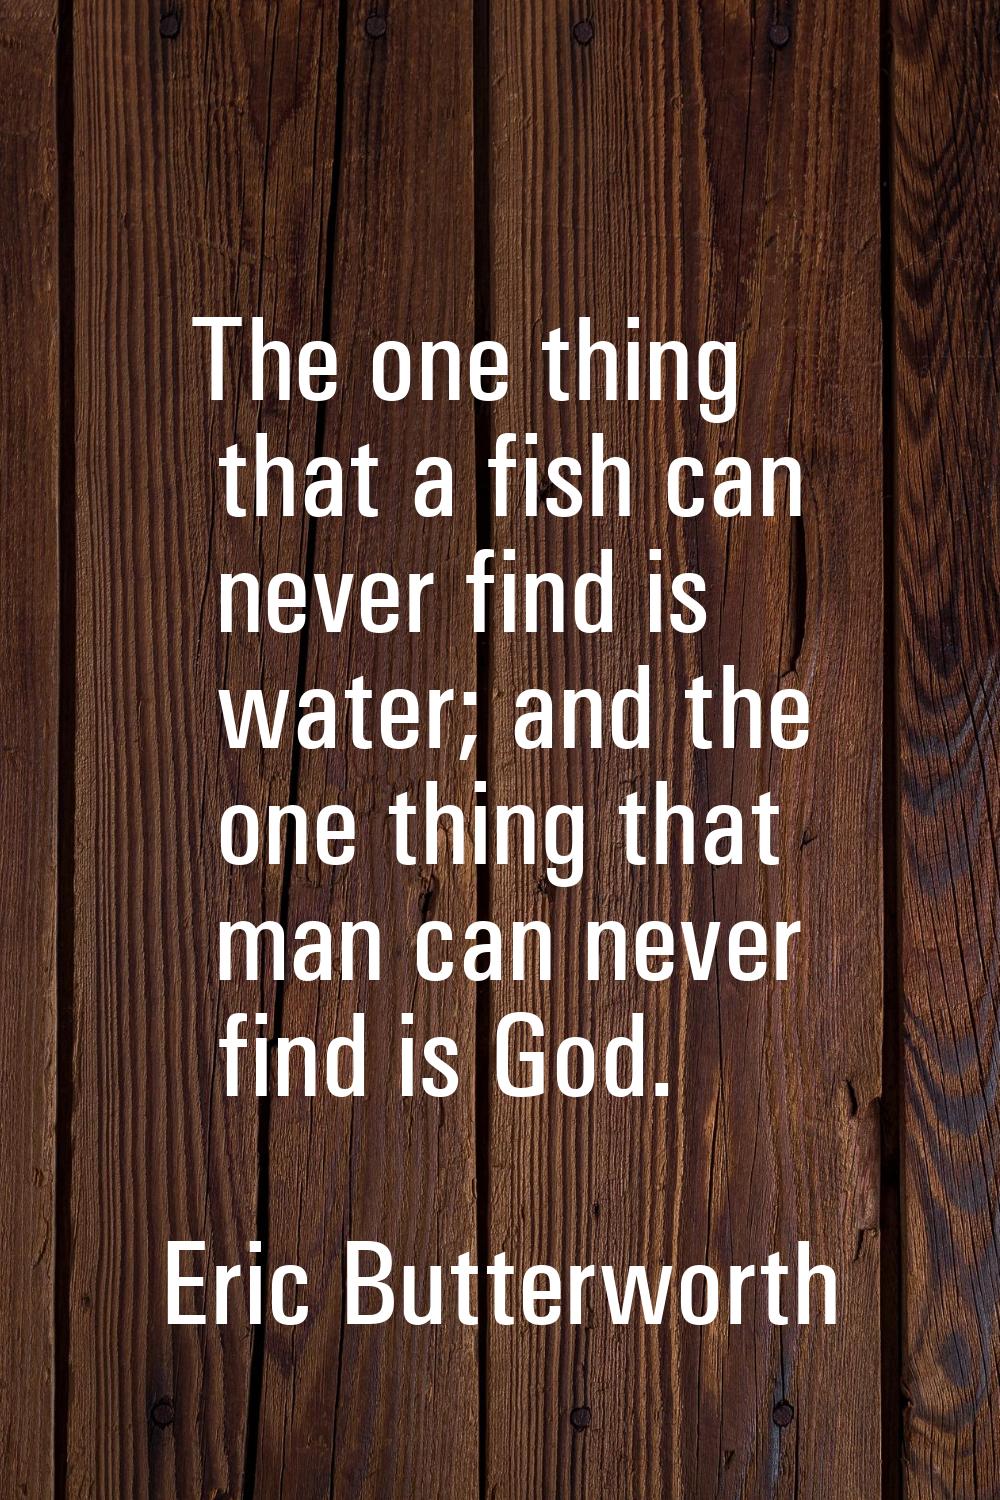 The one thing that a fish can never find is water; and the one thing that man can never find is God